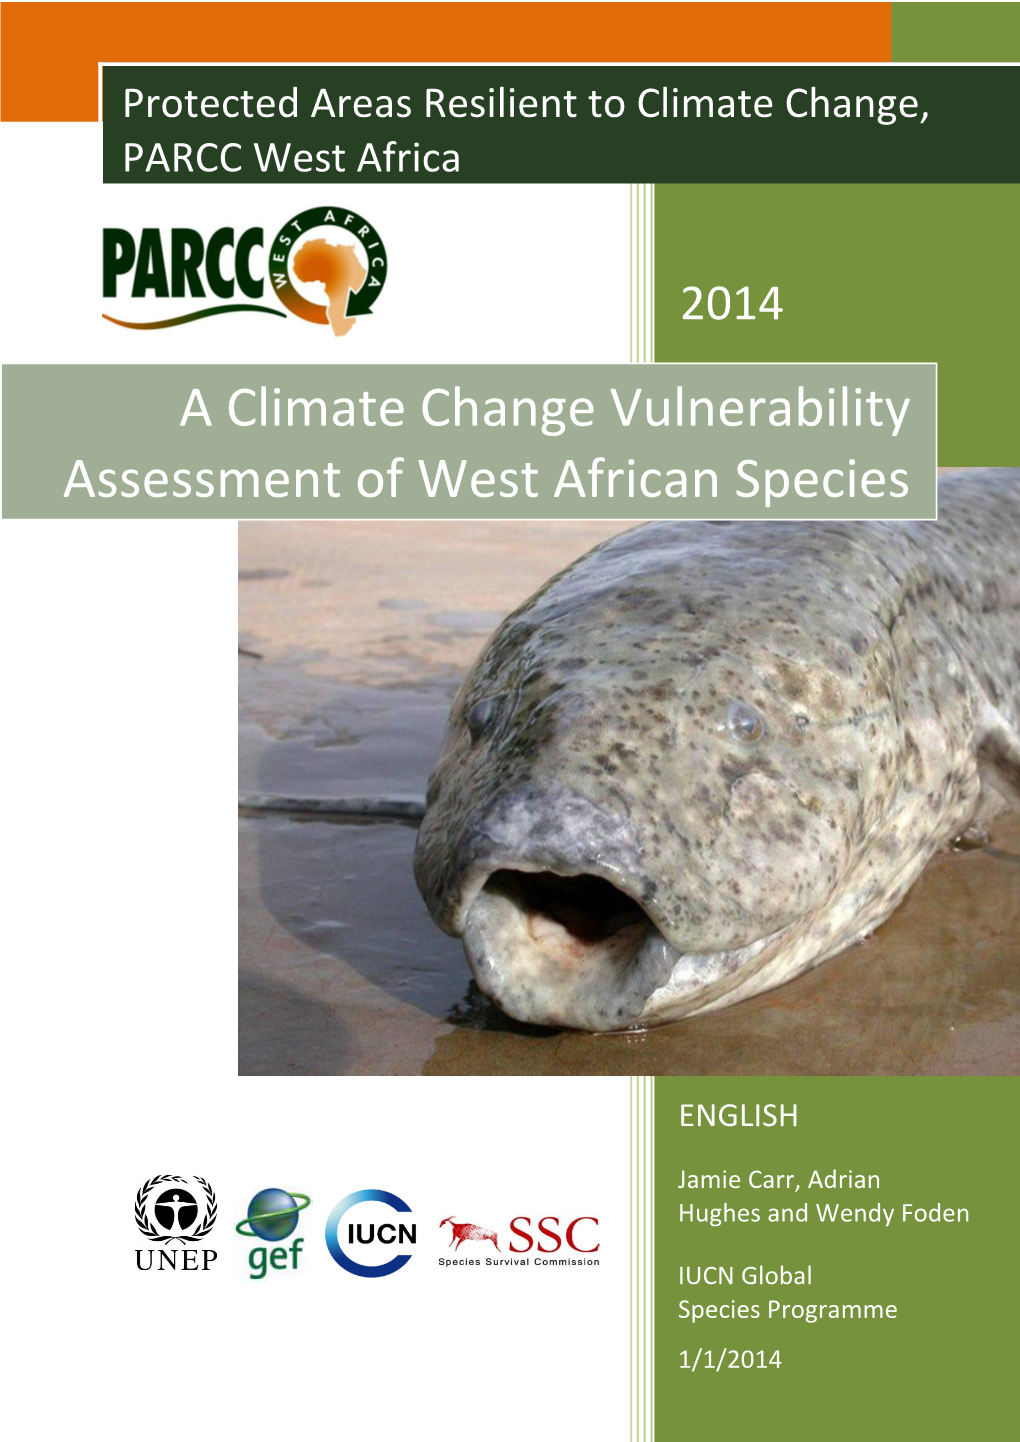 A Climate Change Vulnerability Assessment of West African Species